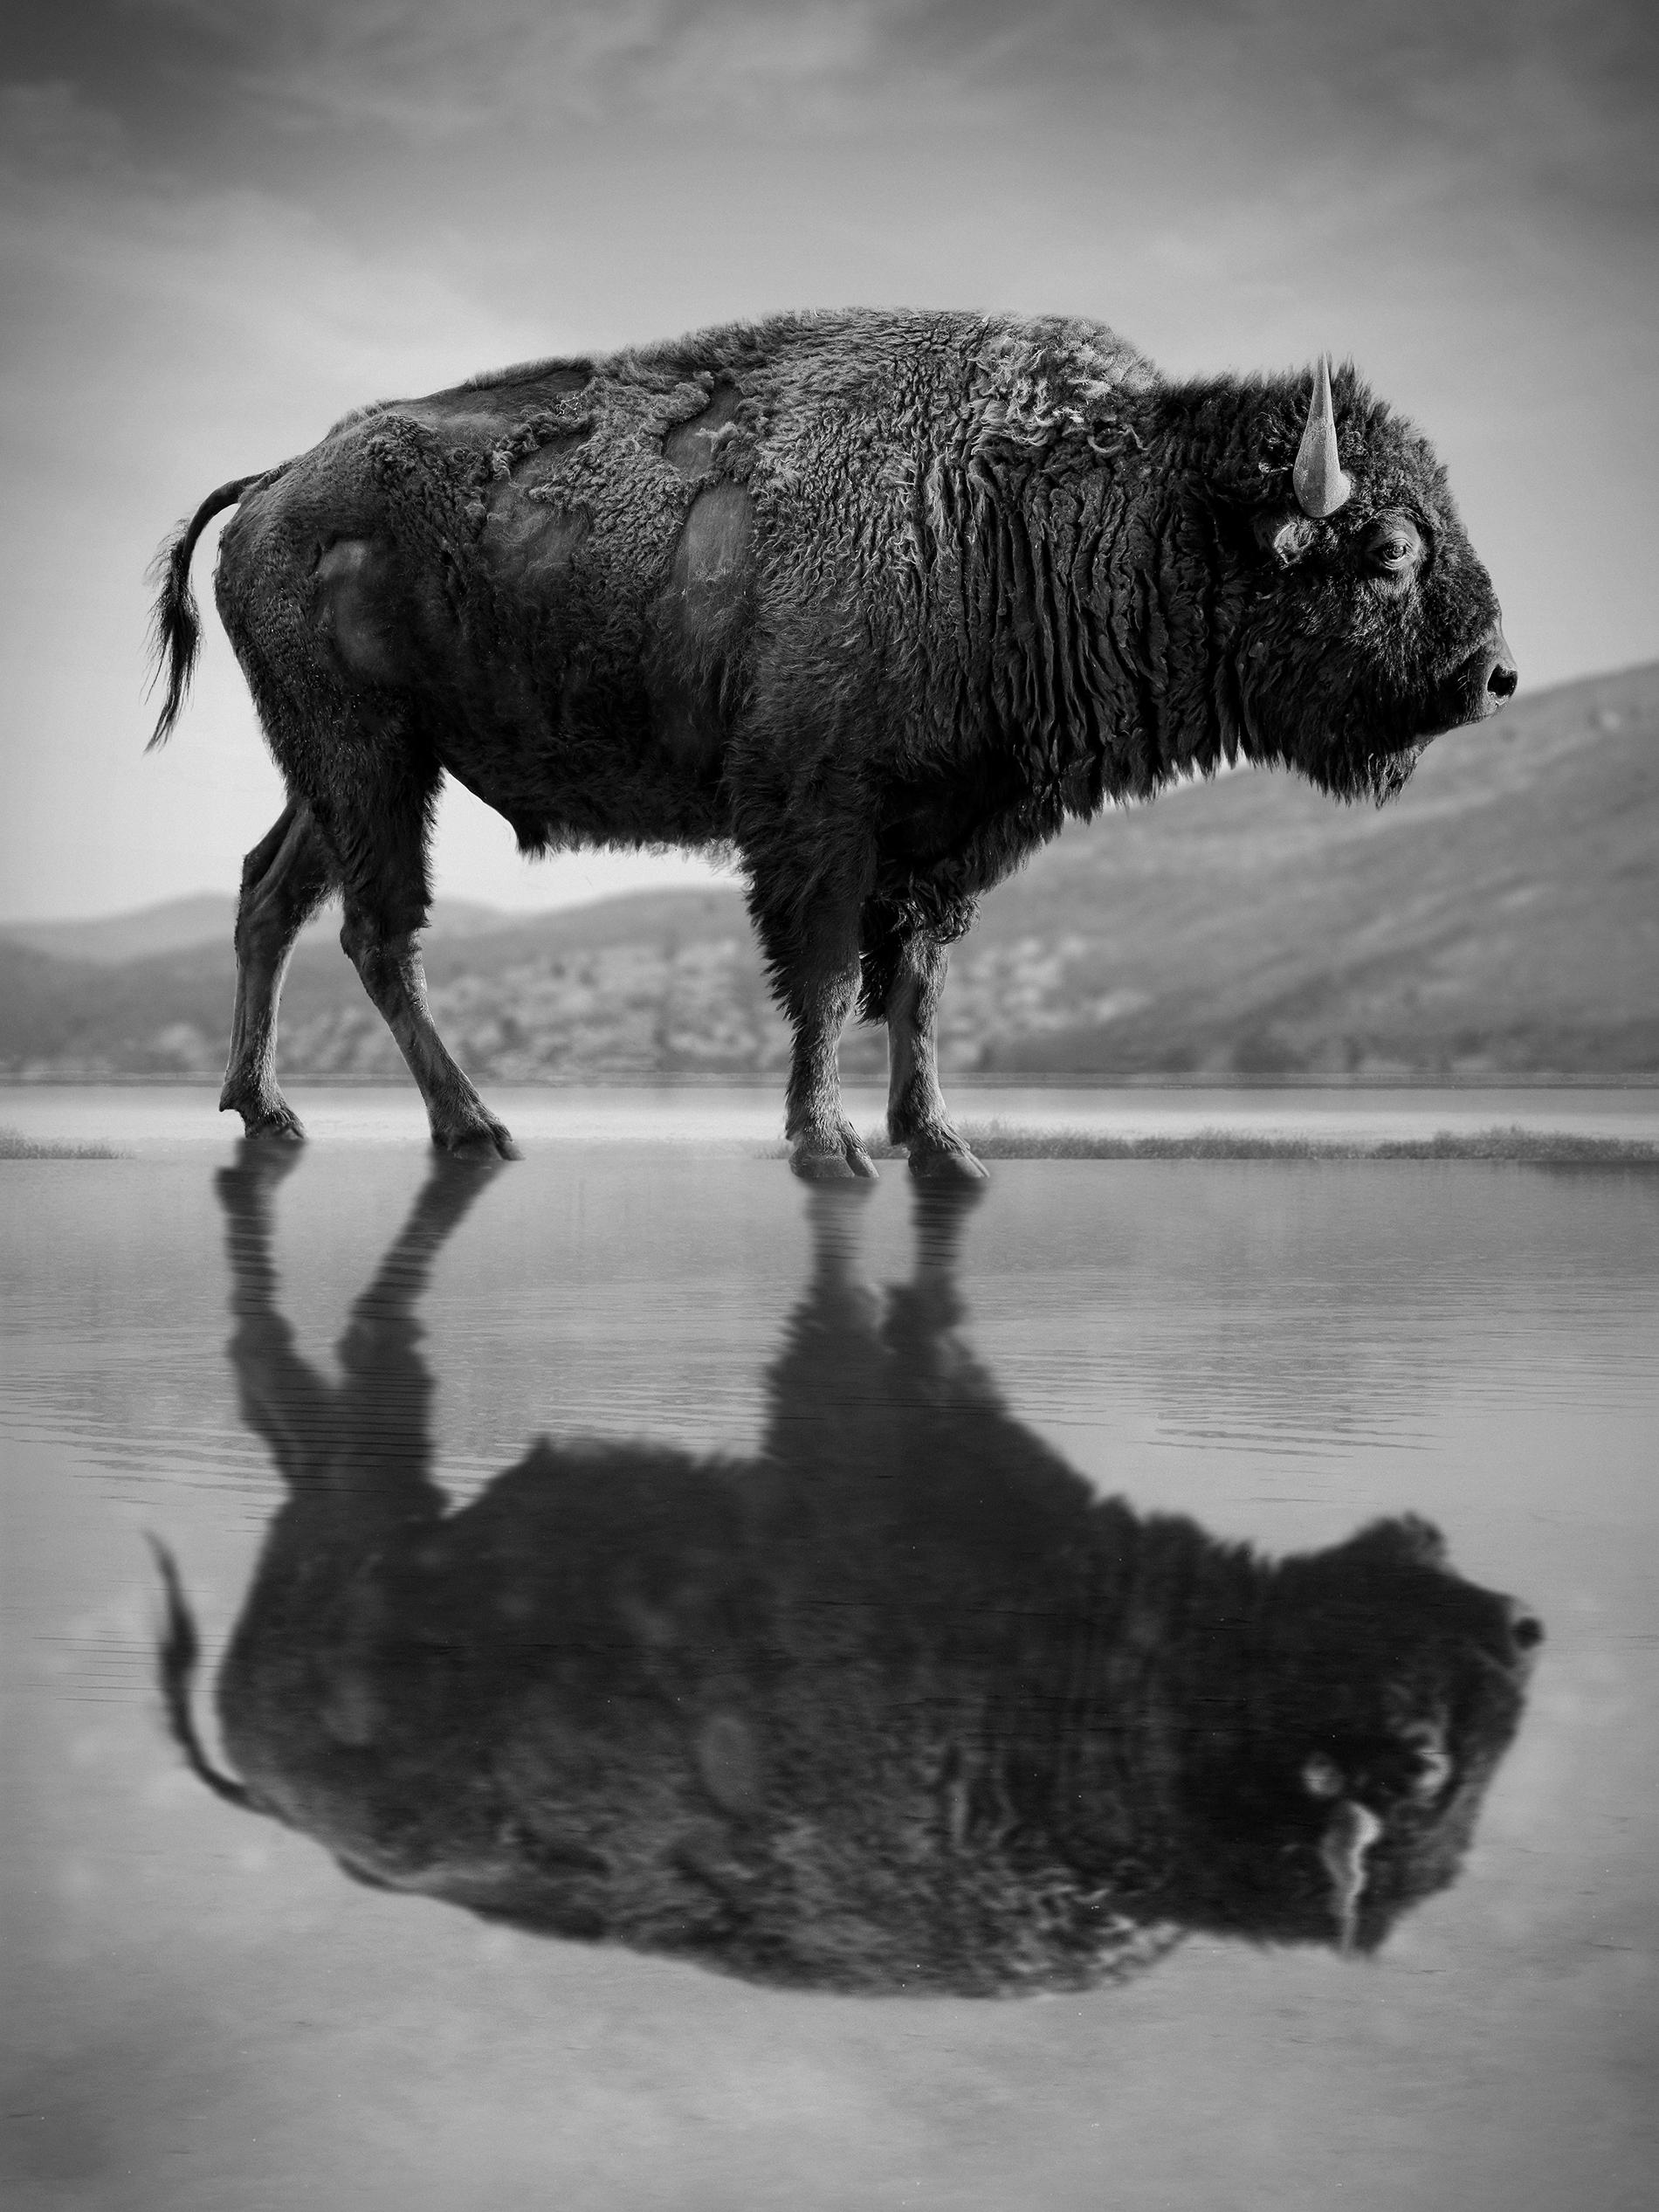 Shane Russeck Animal Print - "Old World" 48x36 Black & White Photography Bison Buffalo Signed AP Photograph